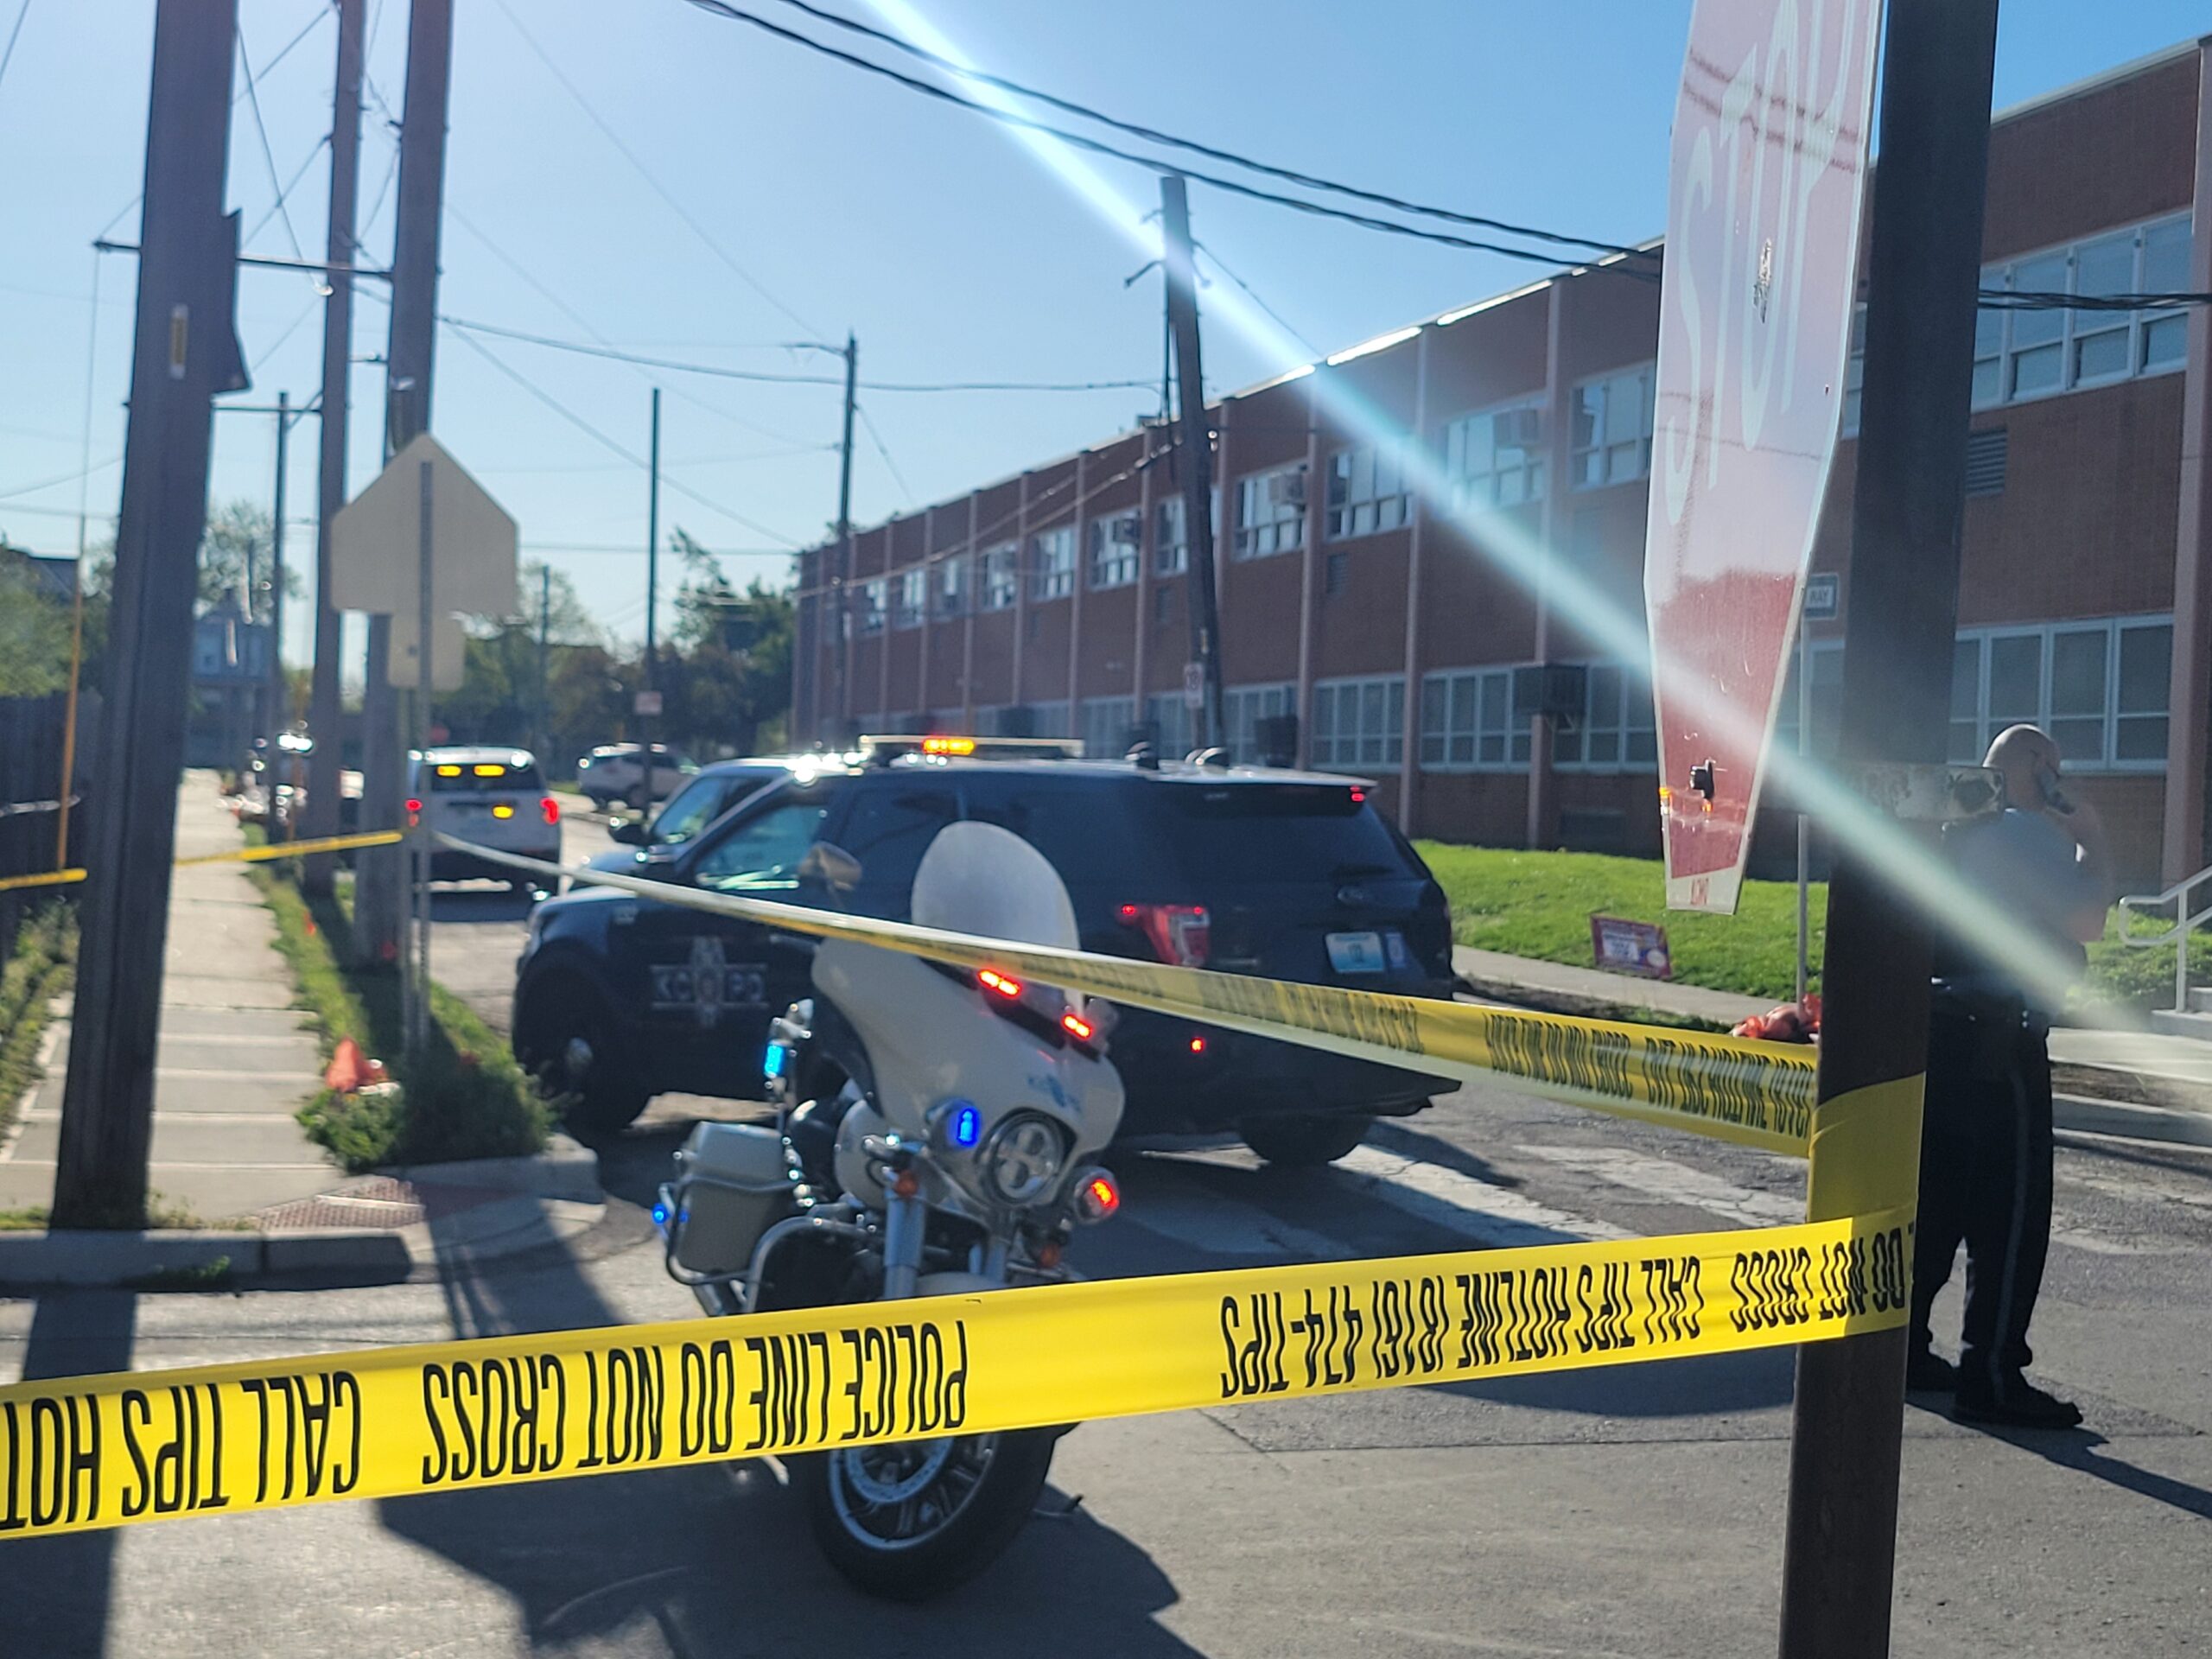 Double shooting sends two to the hospital